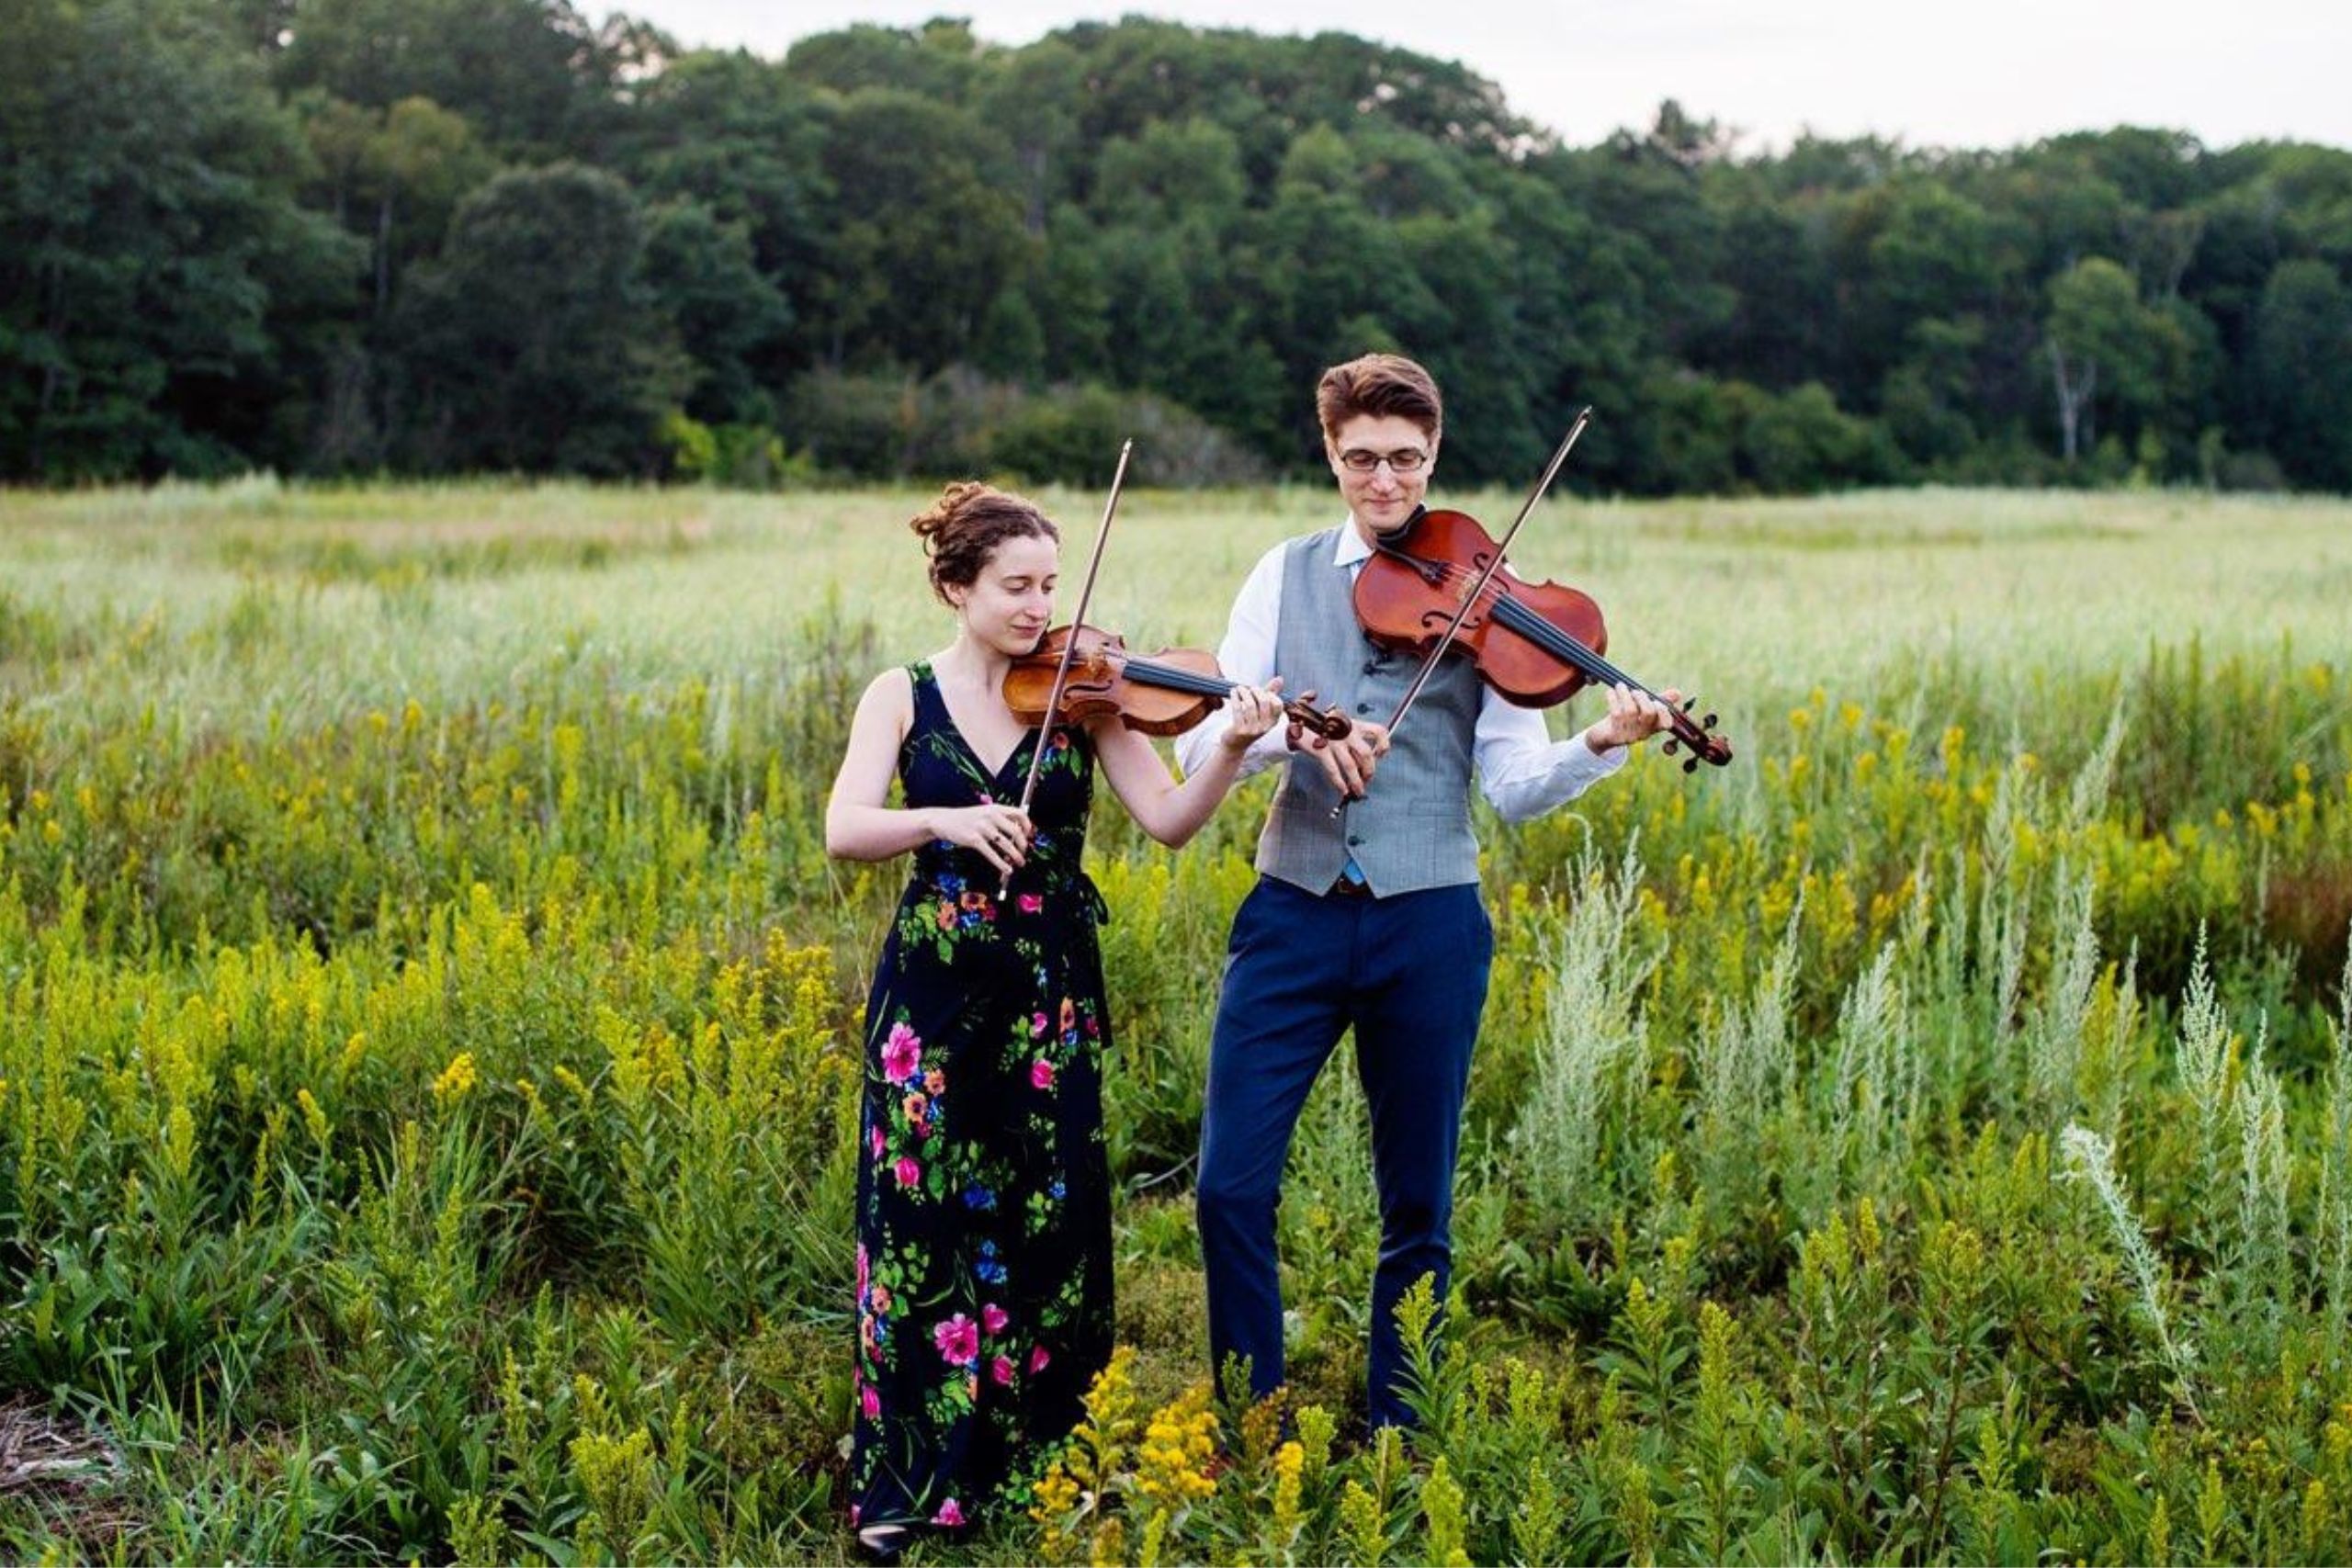 two musicians one playing a violin and another playing a viola in a field of wild flowers with hills and trees behind them.